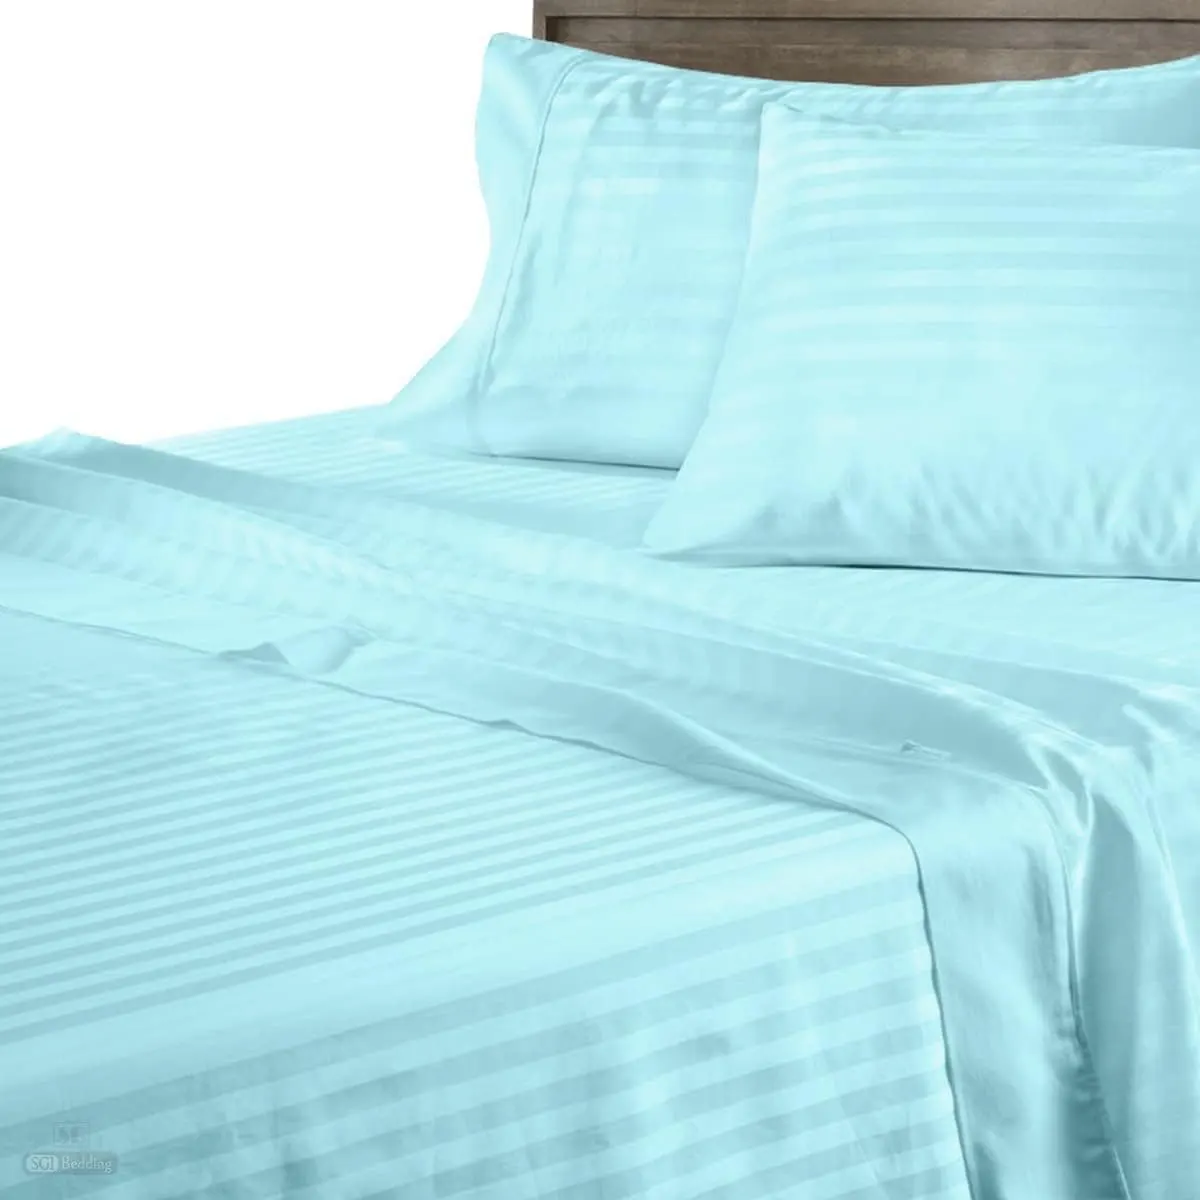 Classy Stripe Fitted Sheet Set, Size 180*200 cm, 3 Pieces, light blue